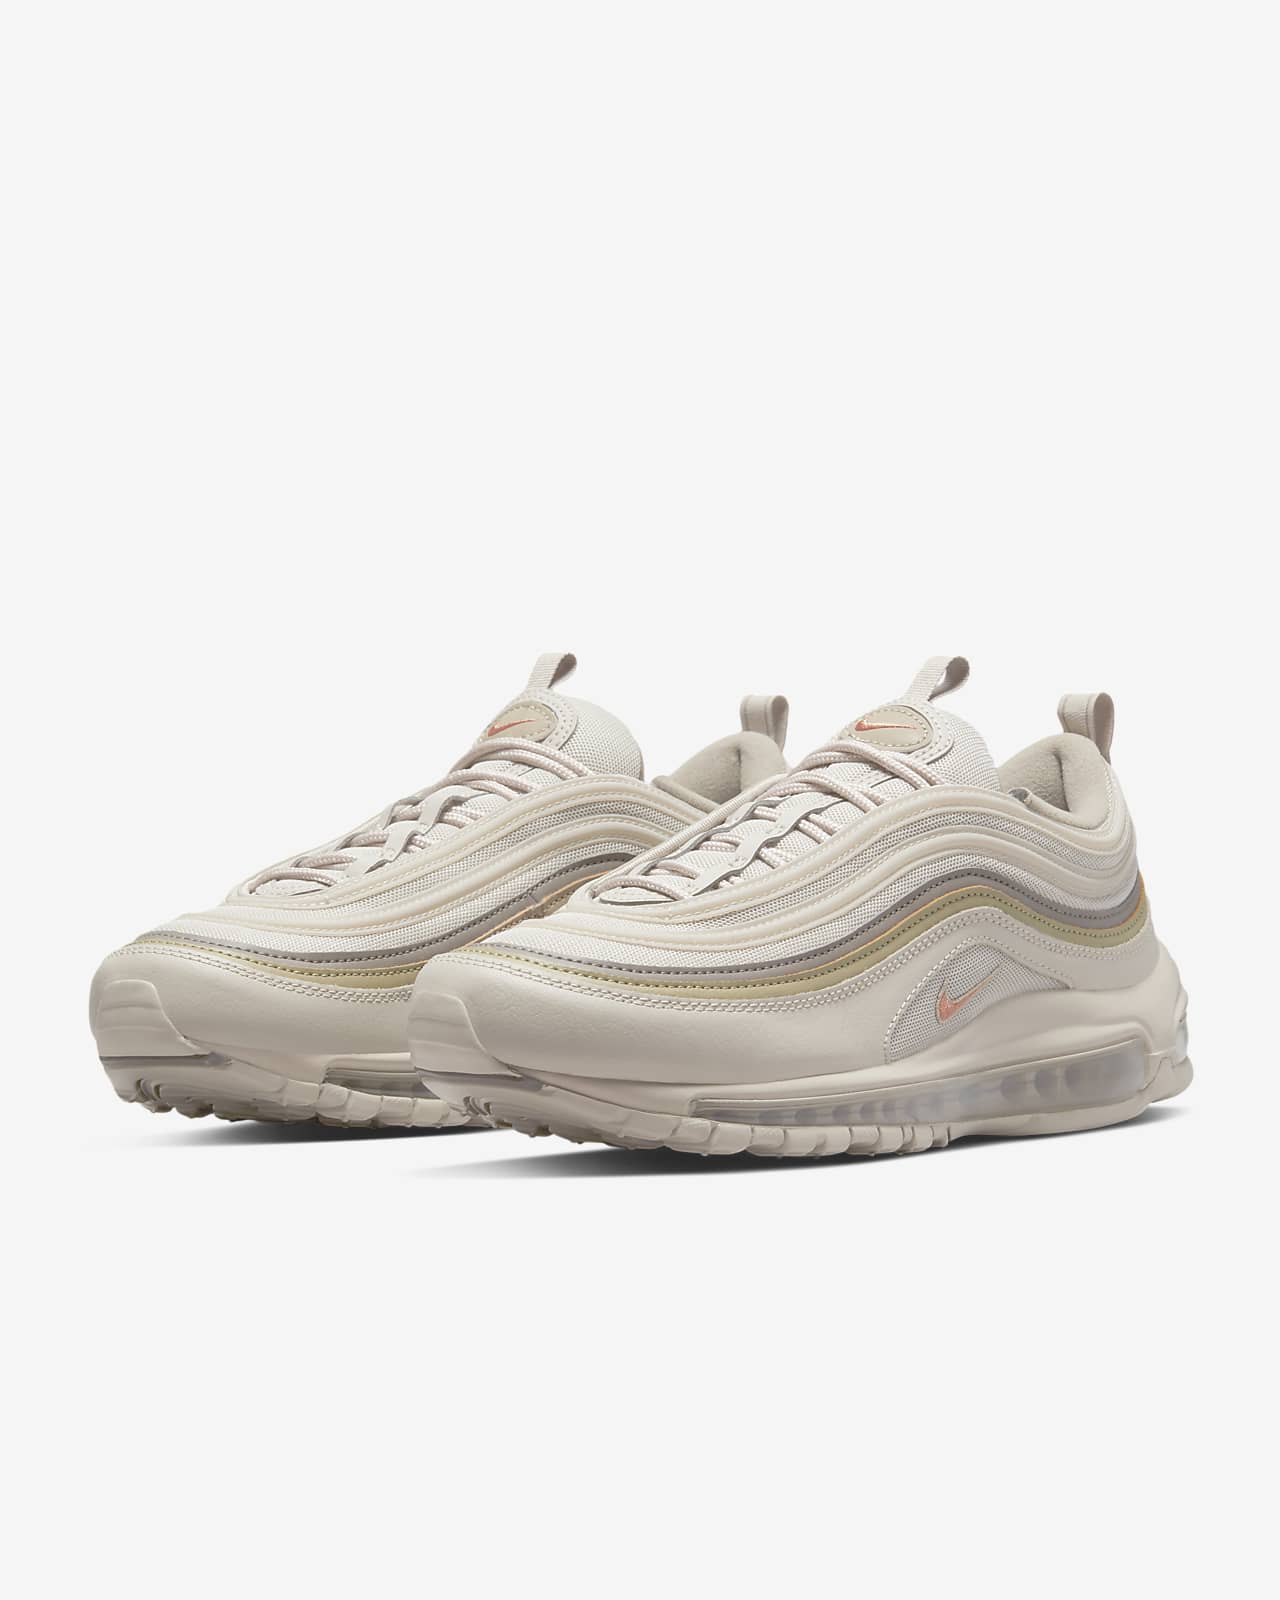 size 12 nike air max 97 shoes